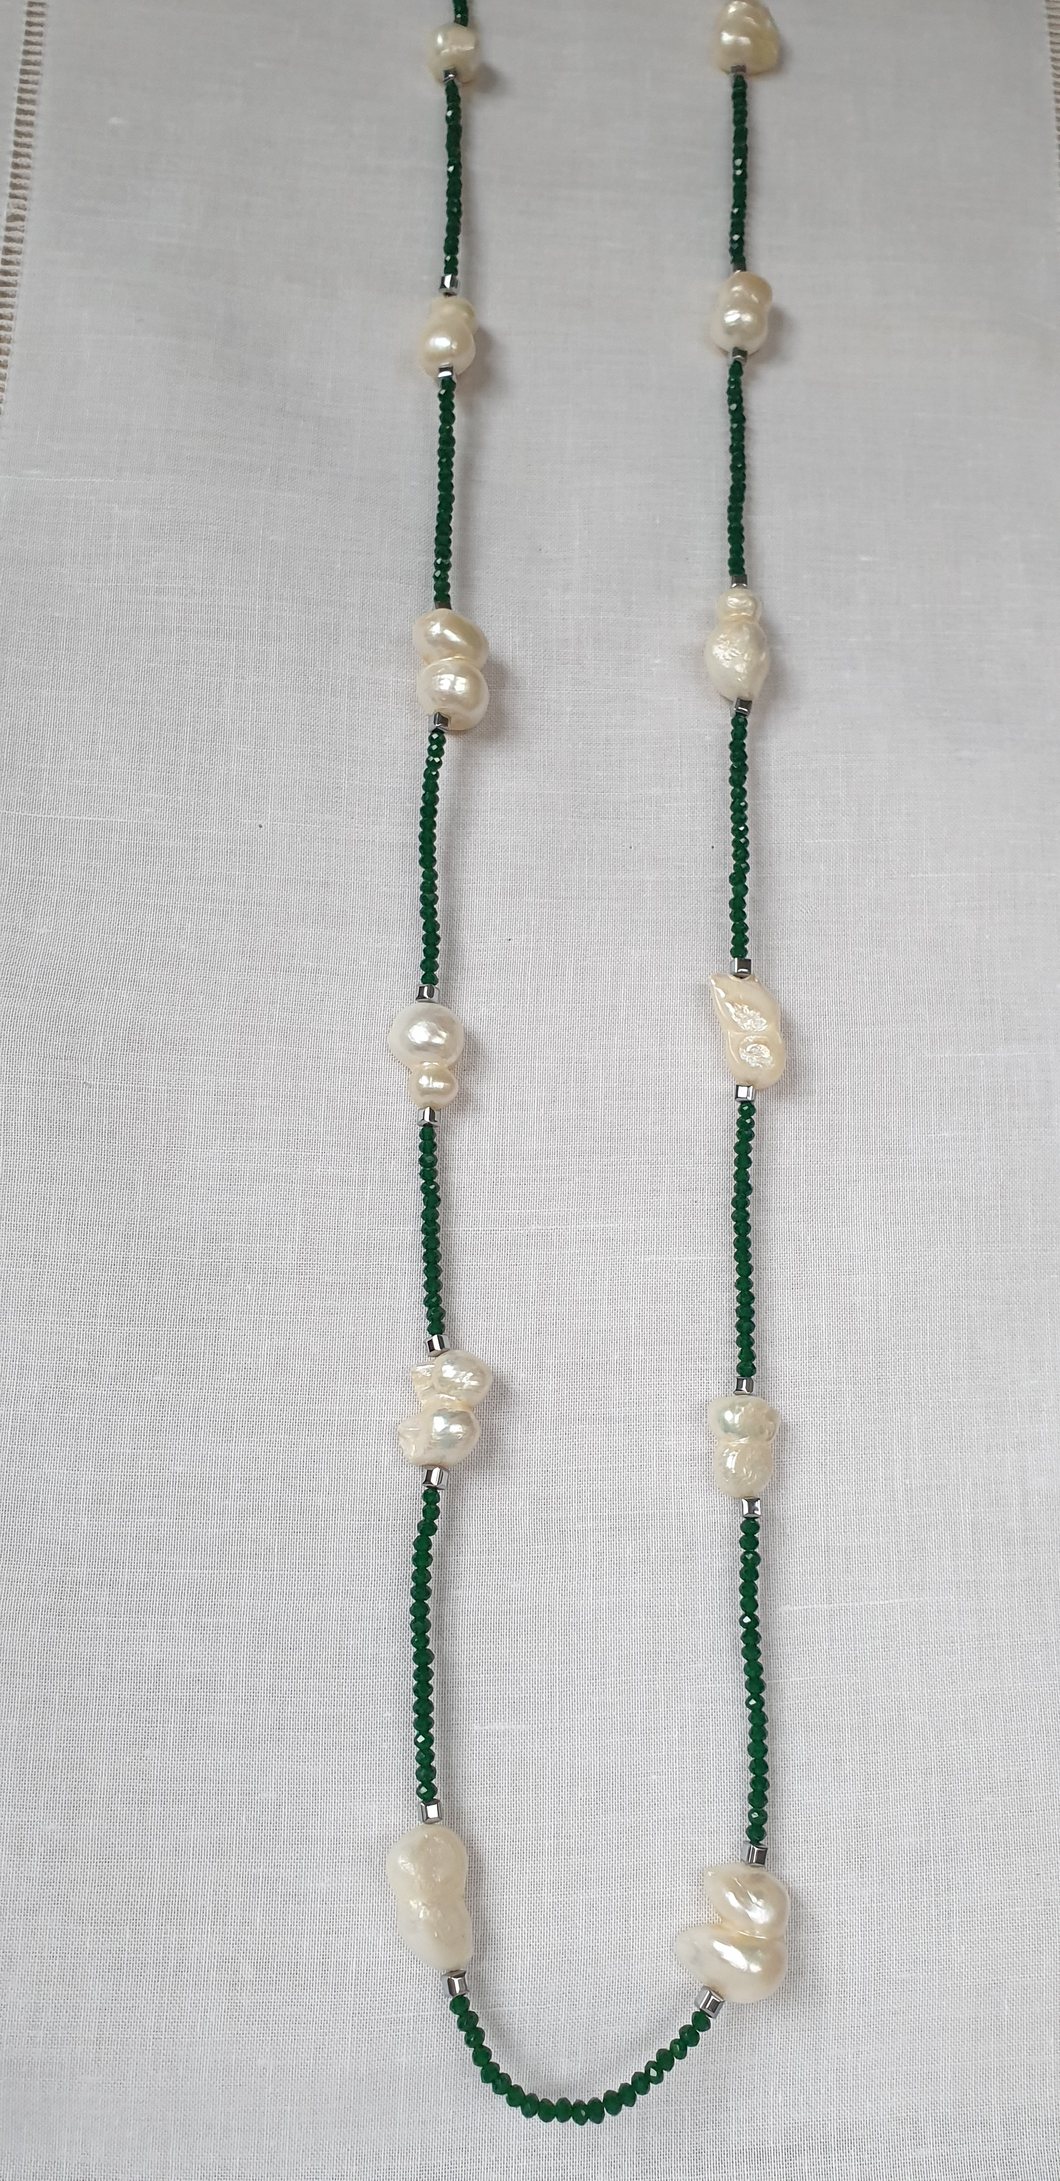 Crystal and freshwater pearl necklace